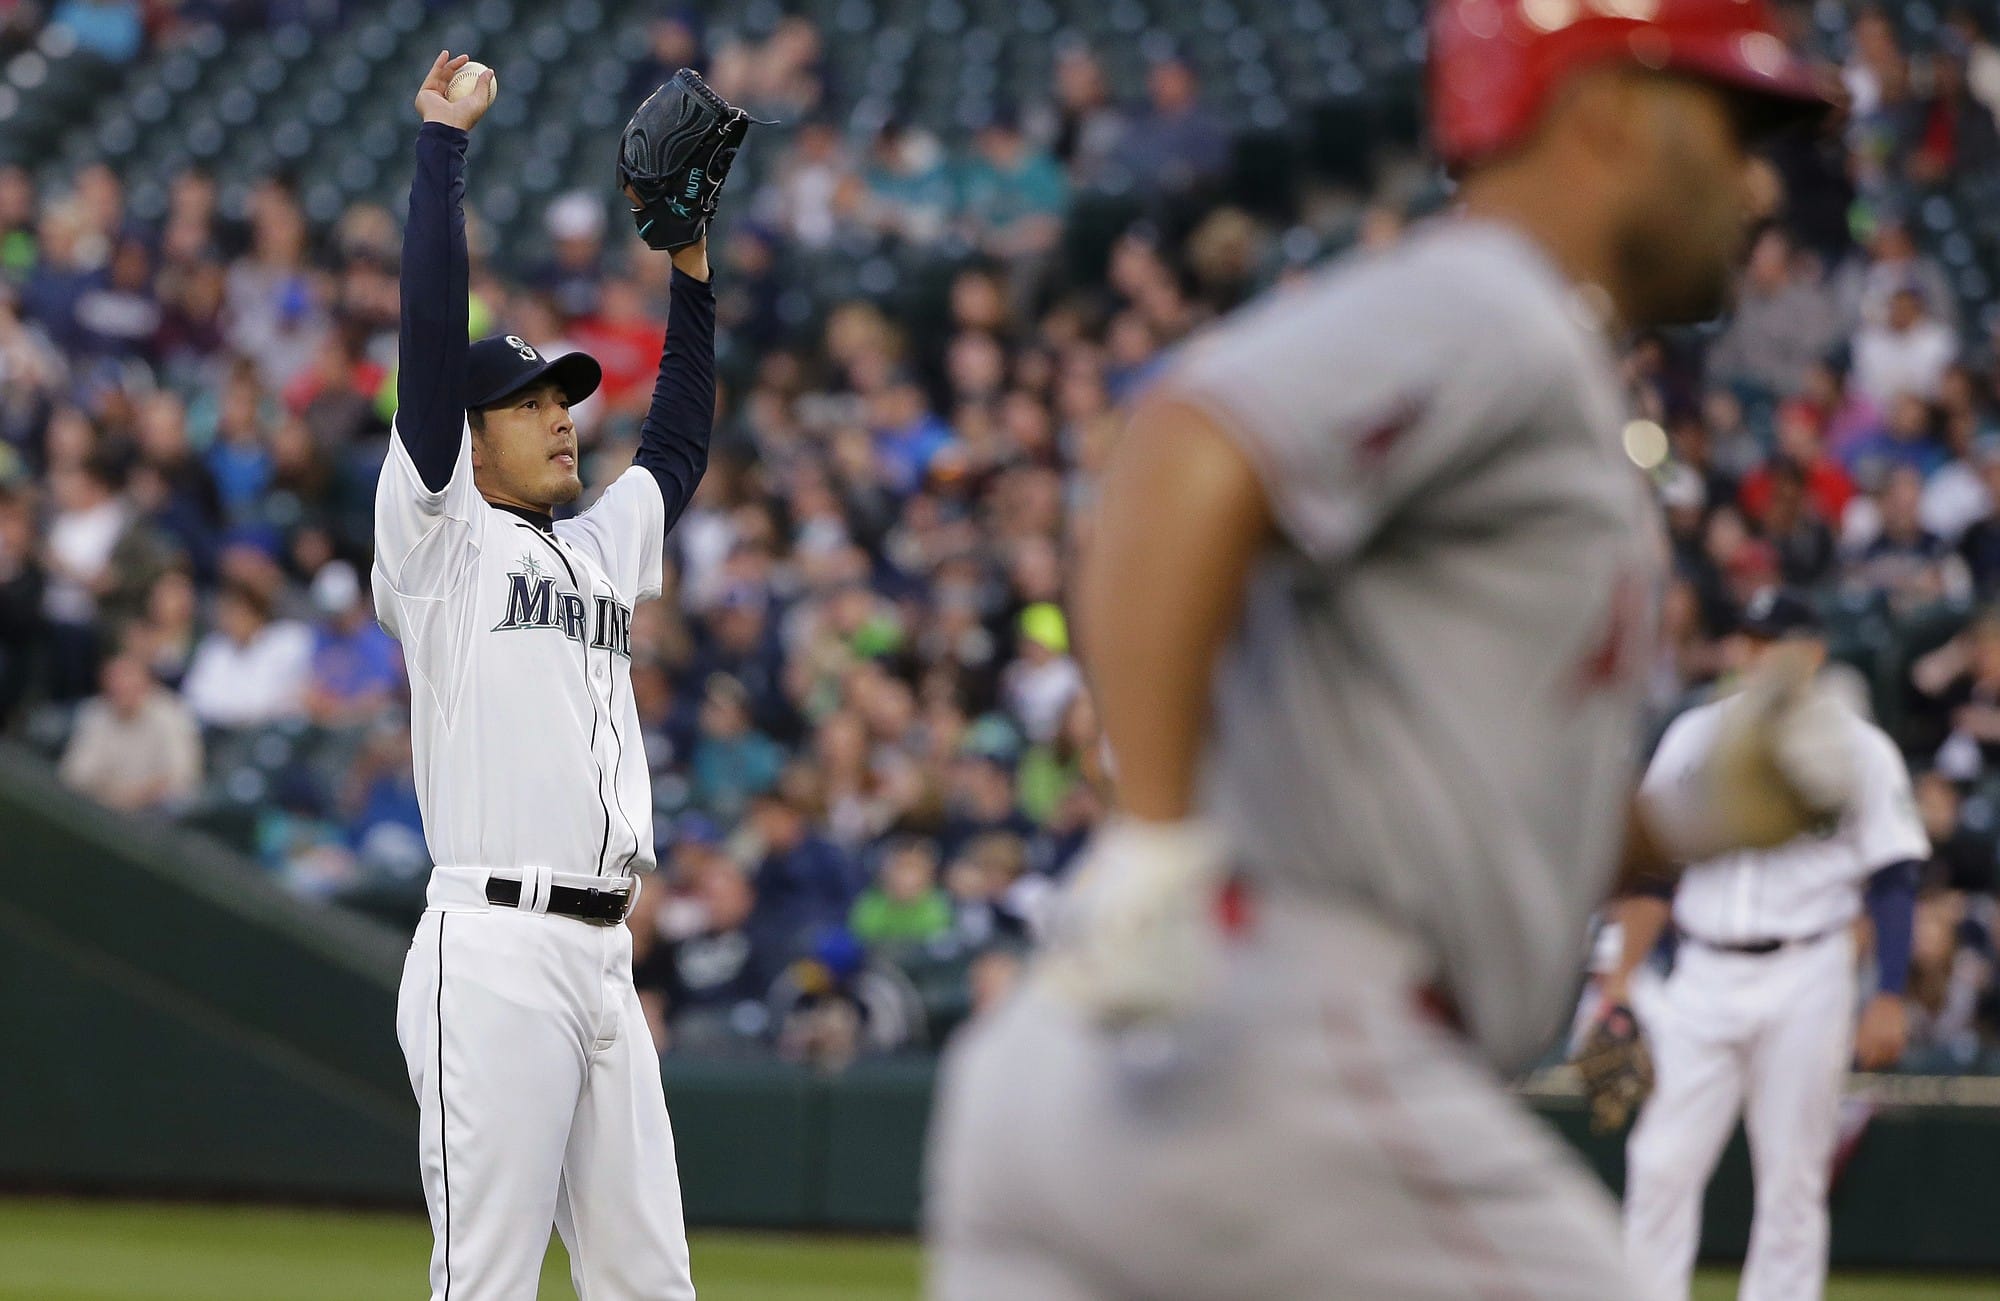 Seattle Mariners starting pitcher Hisashi Iwakuma, left, stretches as Los Angeles Angels' Albert Pujols, right, rounds the bases after hitting a two-run home run in the first inning Wednesday, April 8, 2015, in Seattle. (AP Photo/Ted S.